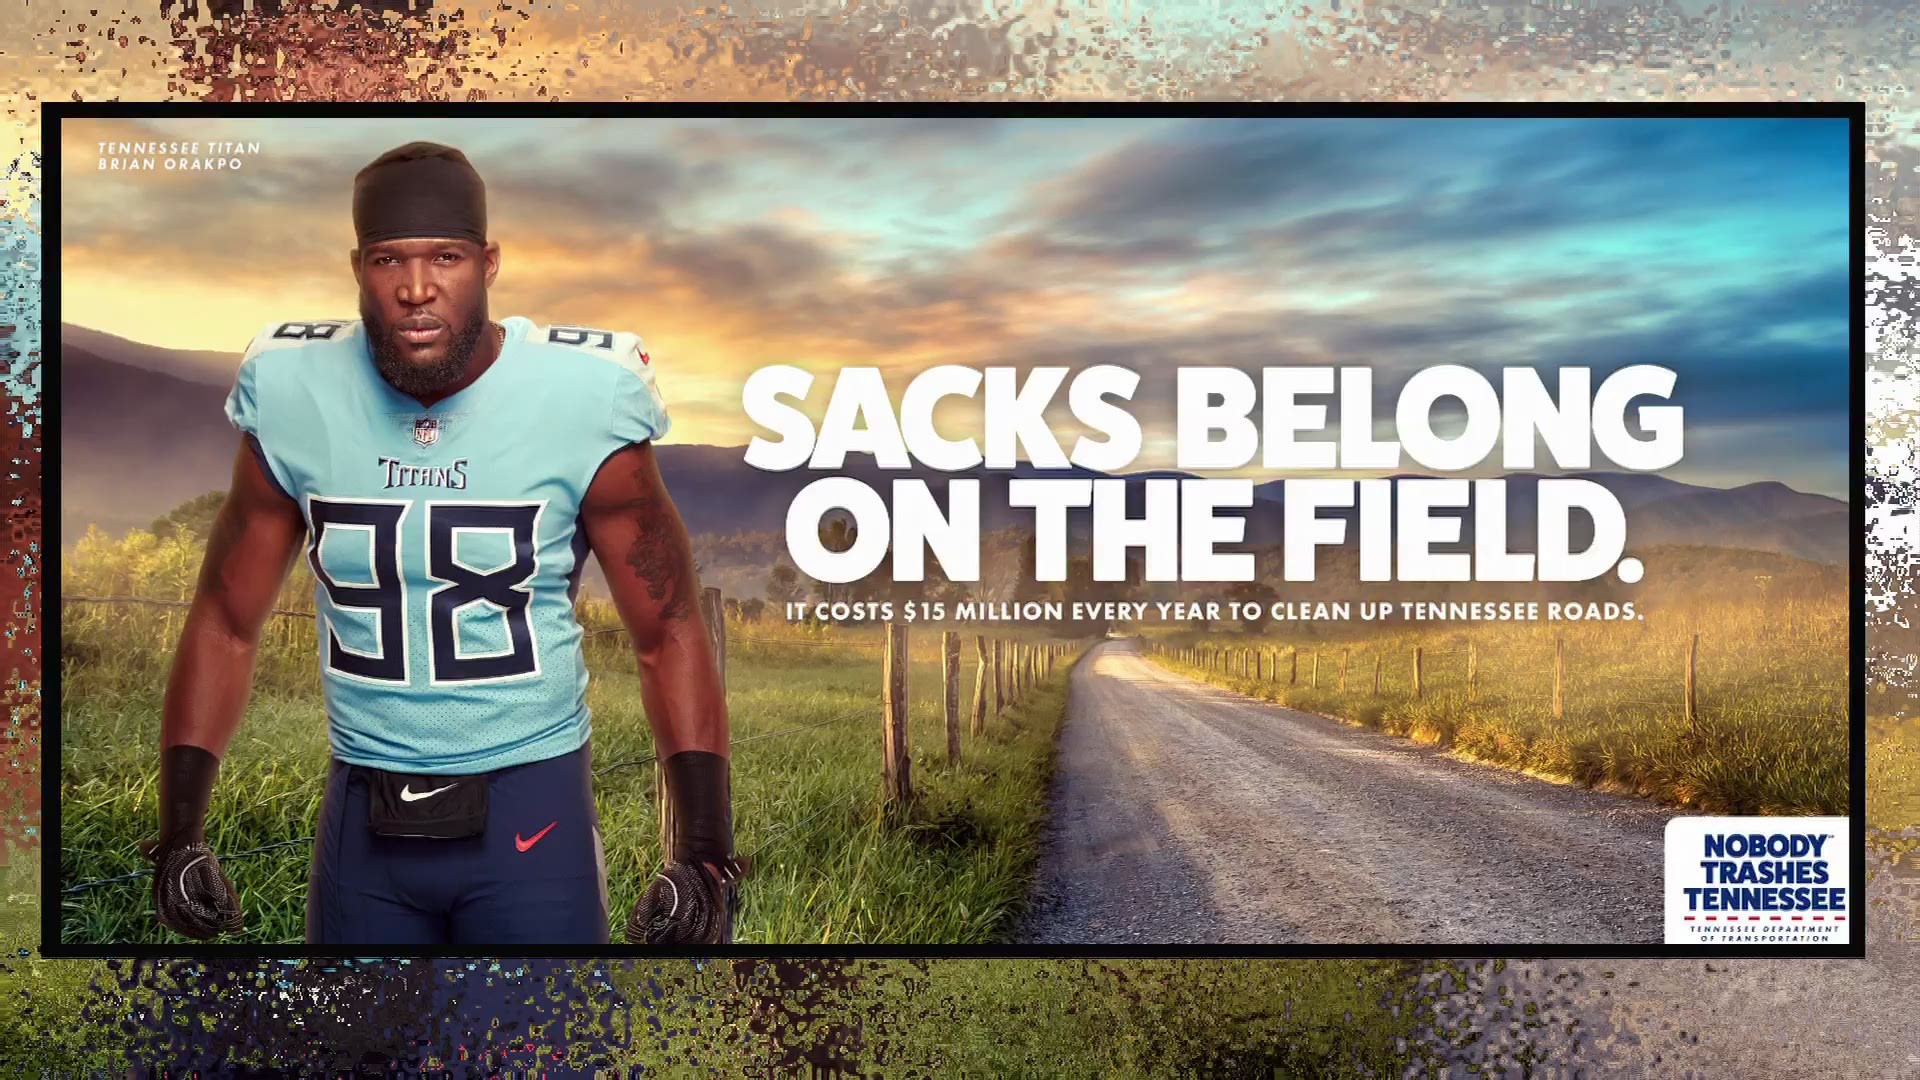 The Tennessee Titans linebacker and former Longhorn defensive end is part of anti-littering campaign in Tennessee.